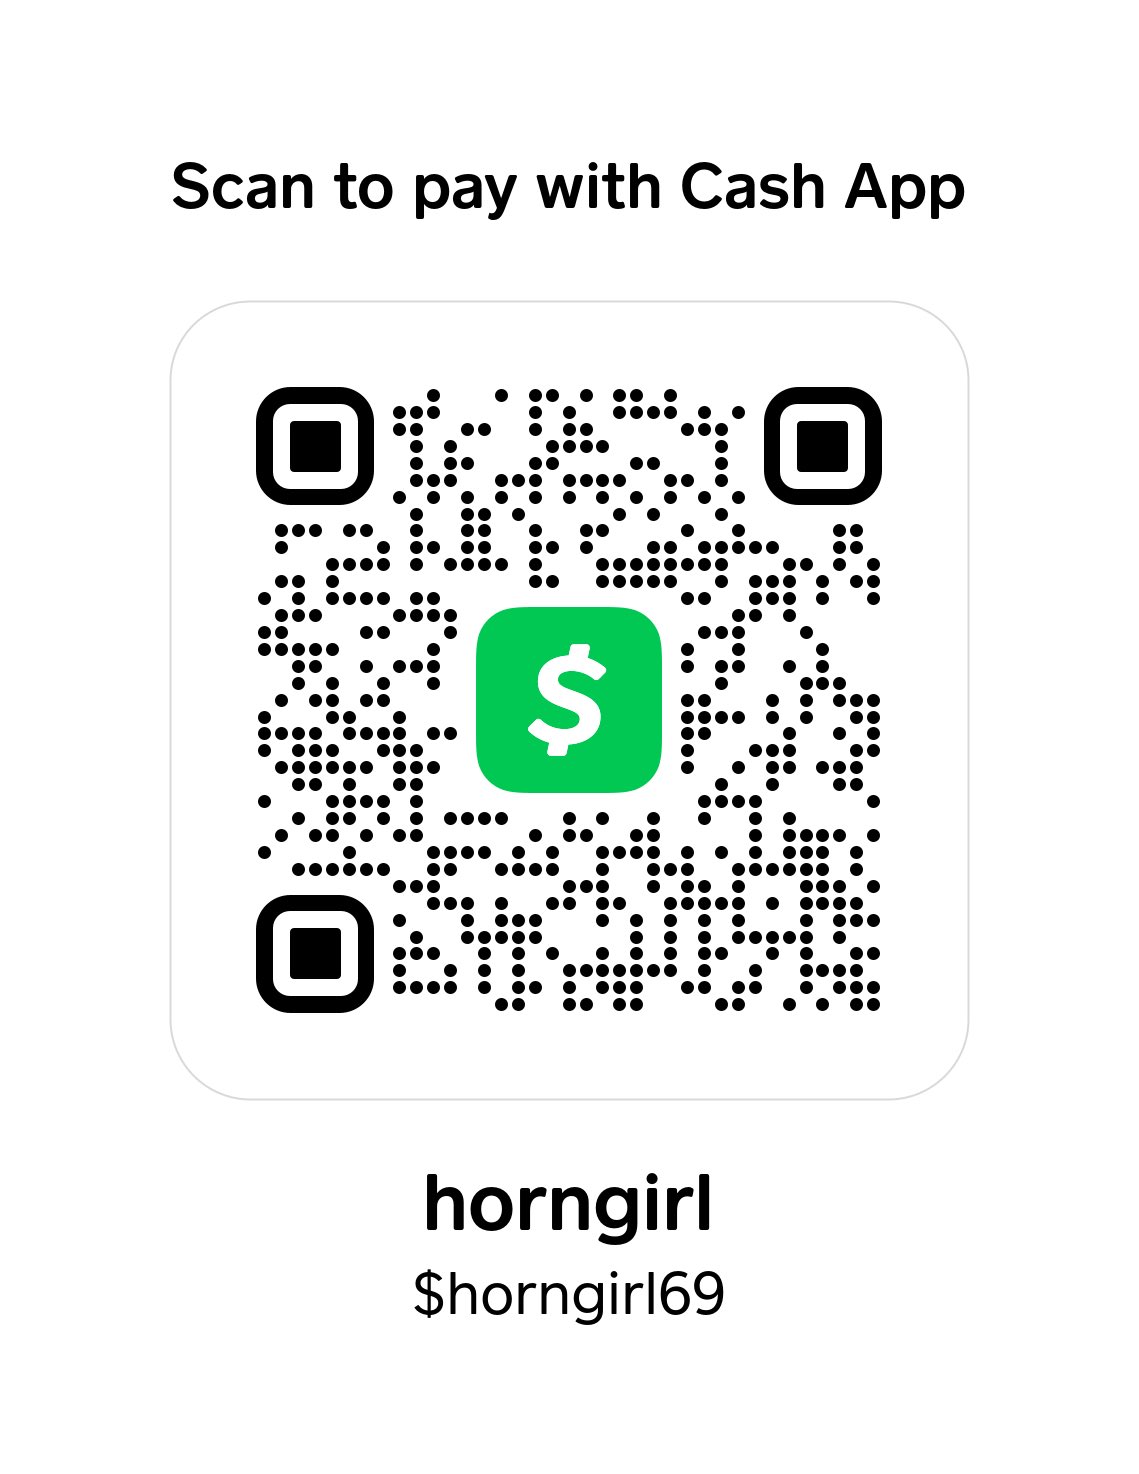 Hwordgirl On Twitter Hiii Trying Out A Tip Jar On Cashapp Lmk If You Send Anything And I’ll